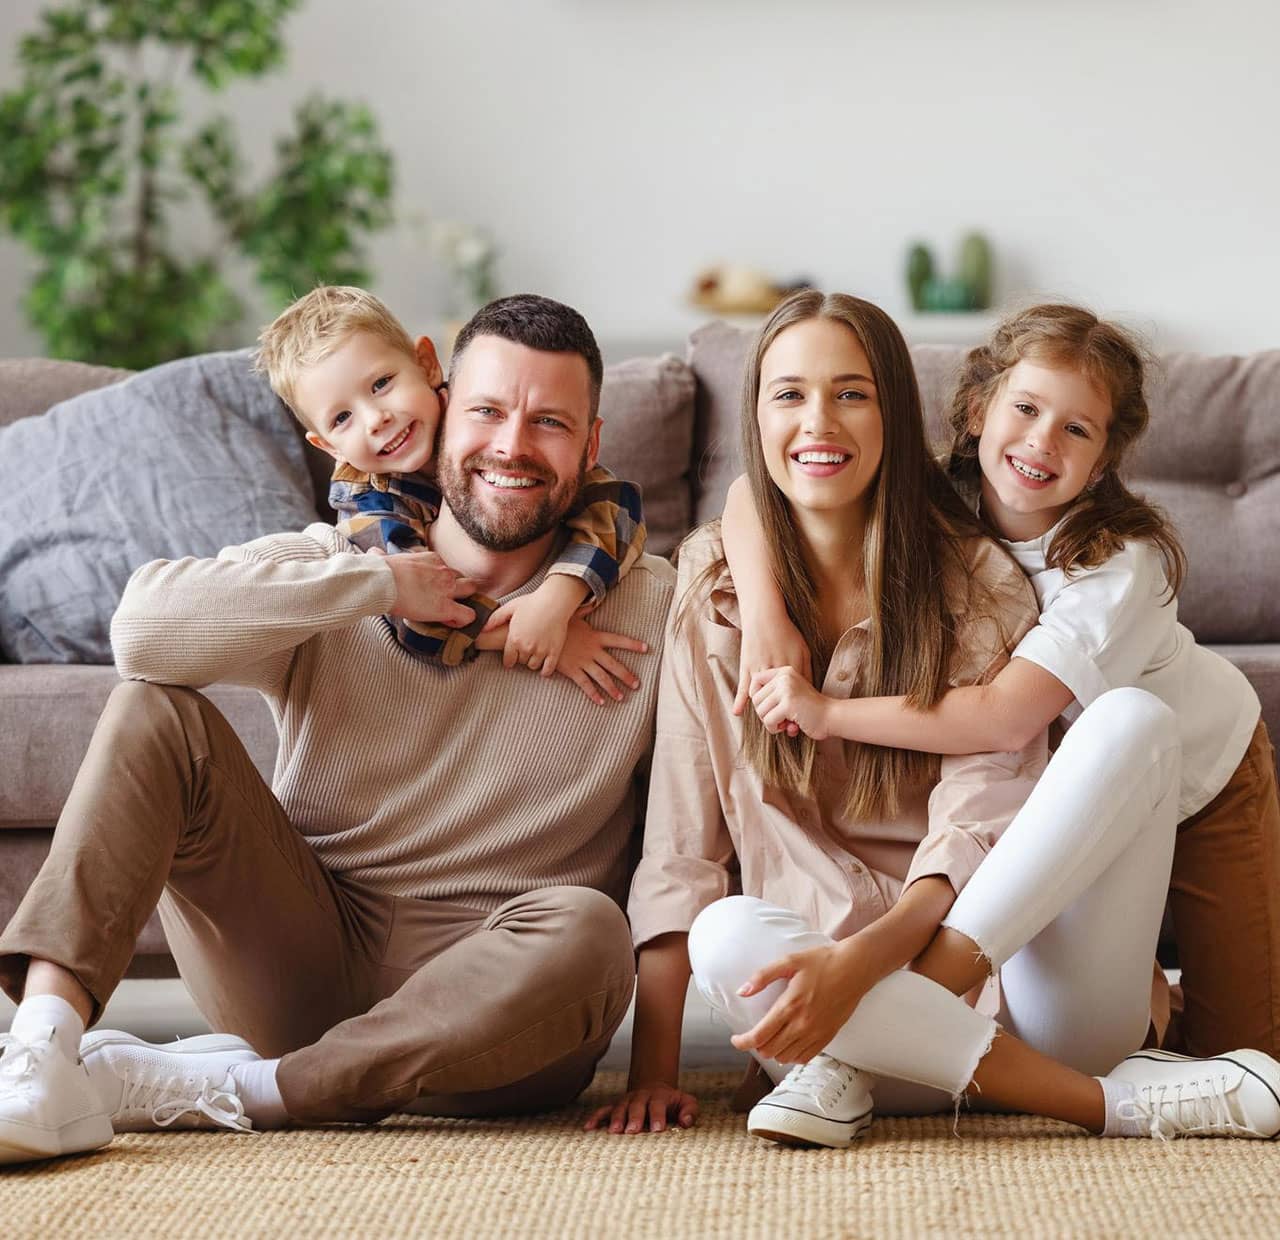 parents with two young kids smiling sitting in front of the couch